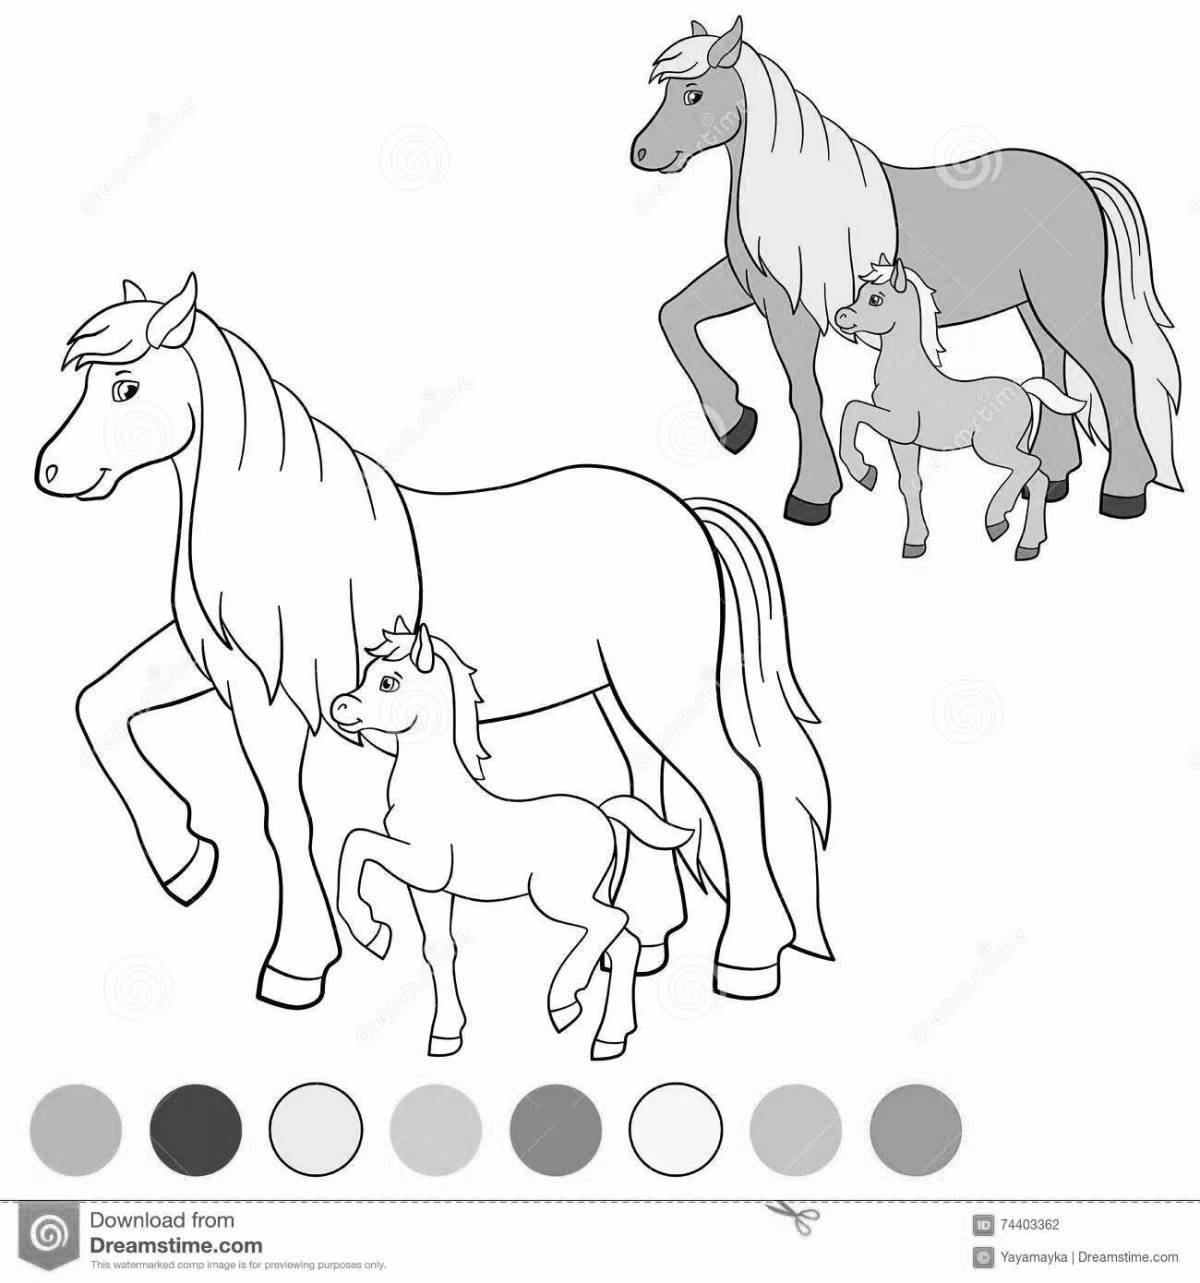 Radiant coloring page horse family